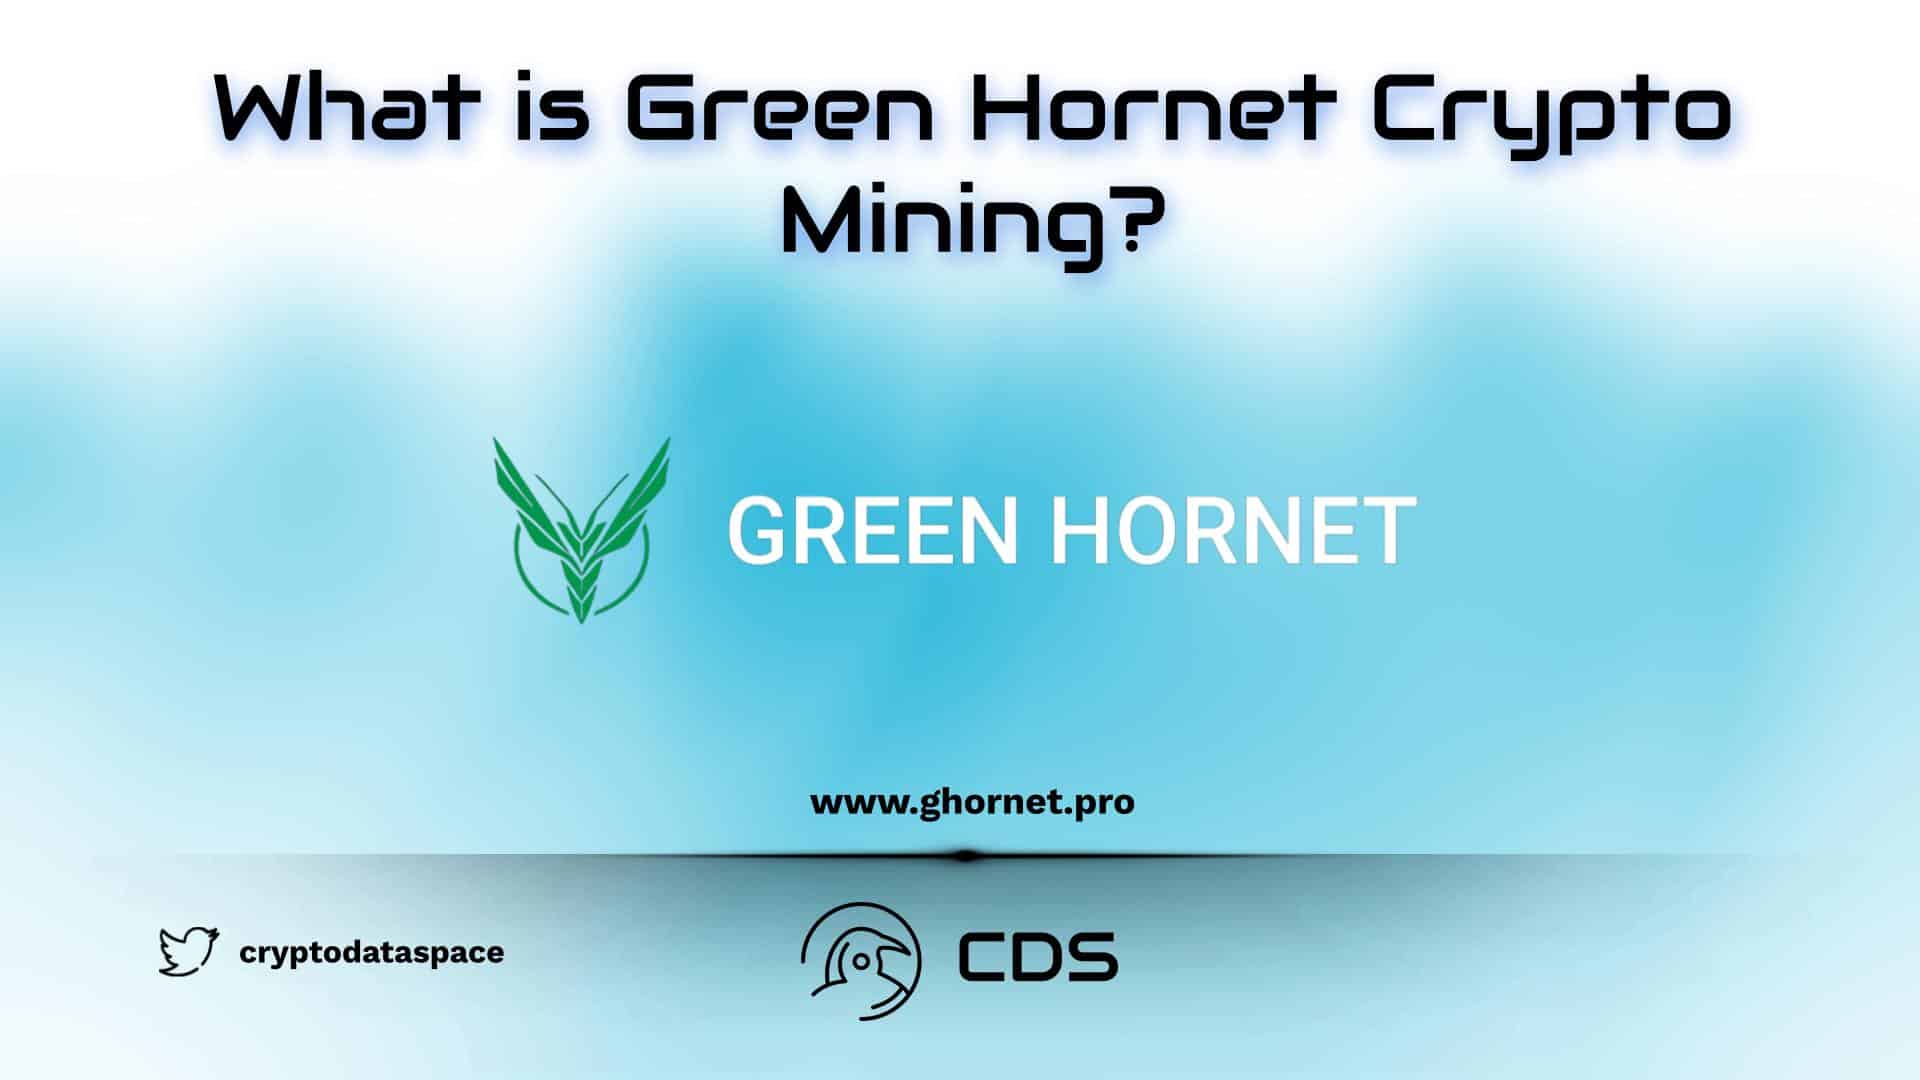 What is Green Hornet Crypto Mining?